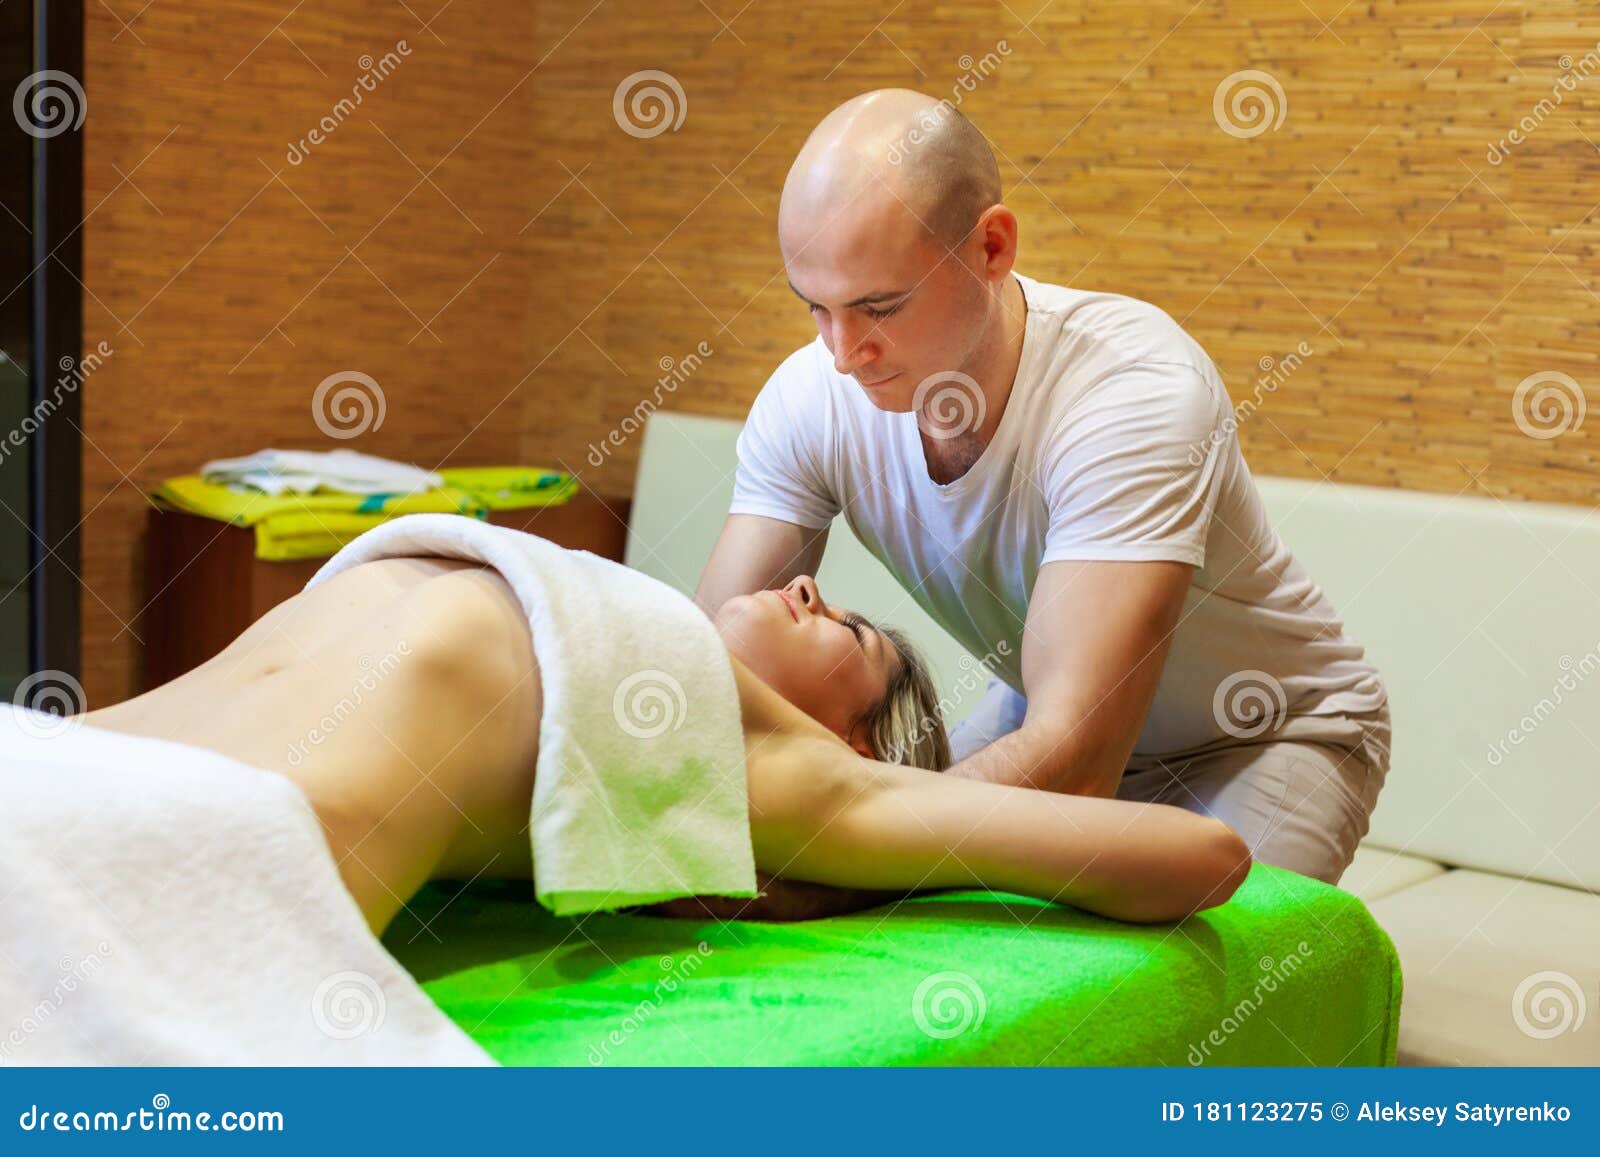 Masseur Works On Woman Arms Doing Traditional Thai Massage O